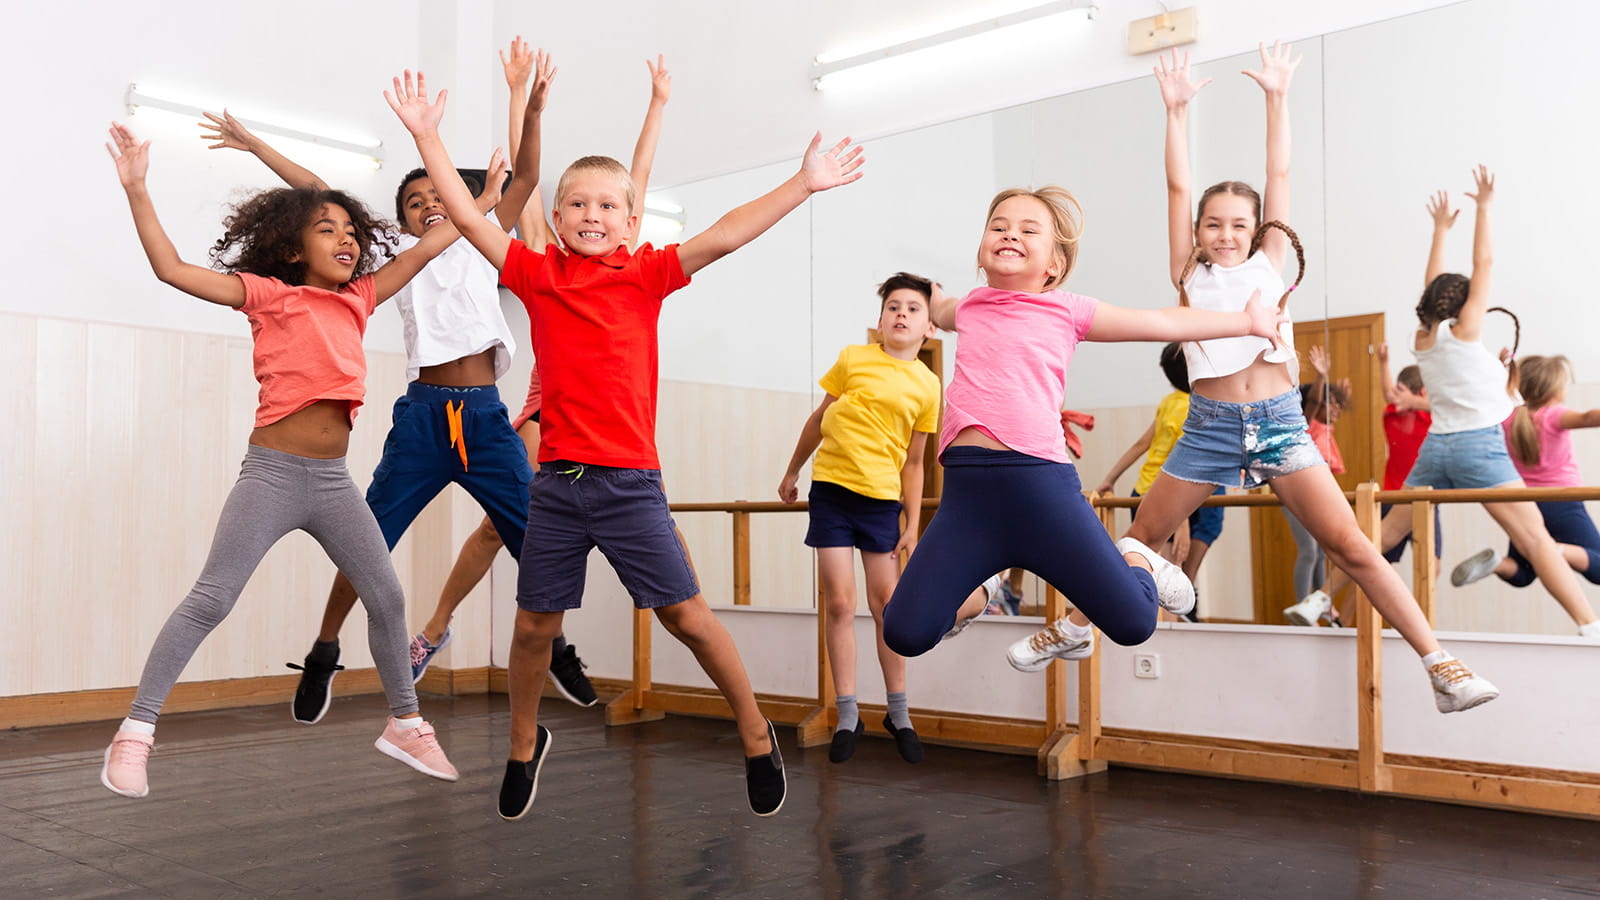 Children jumping in the air in a dance studio